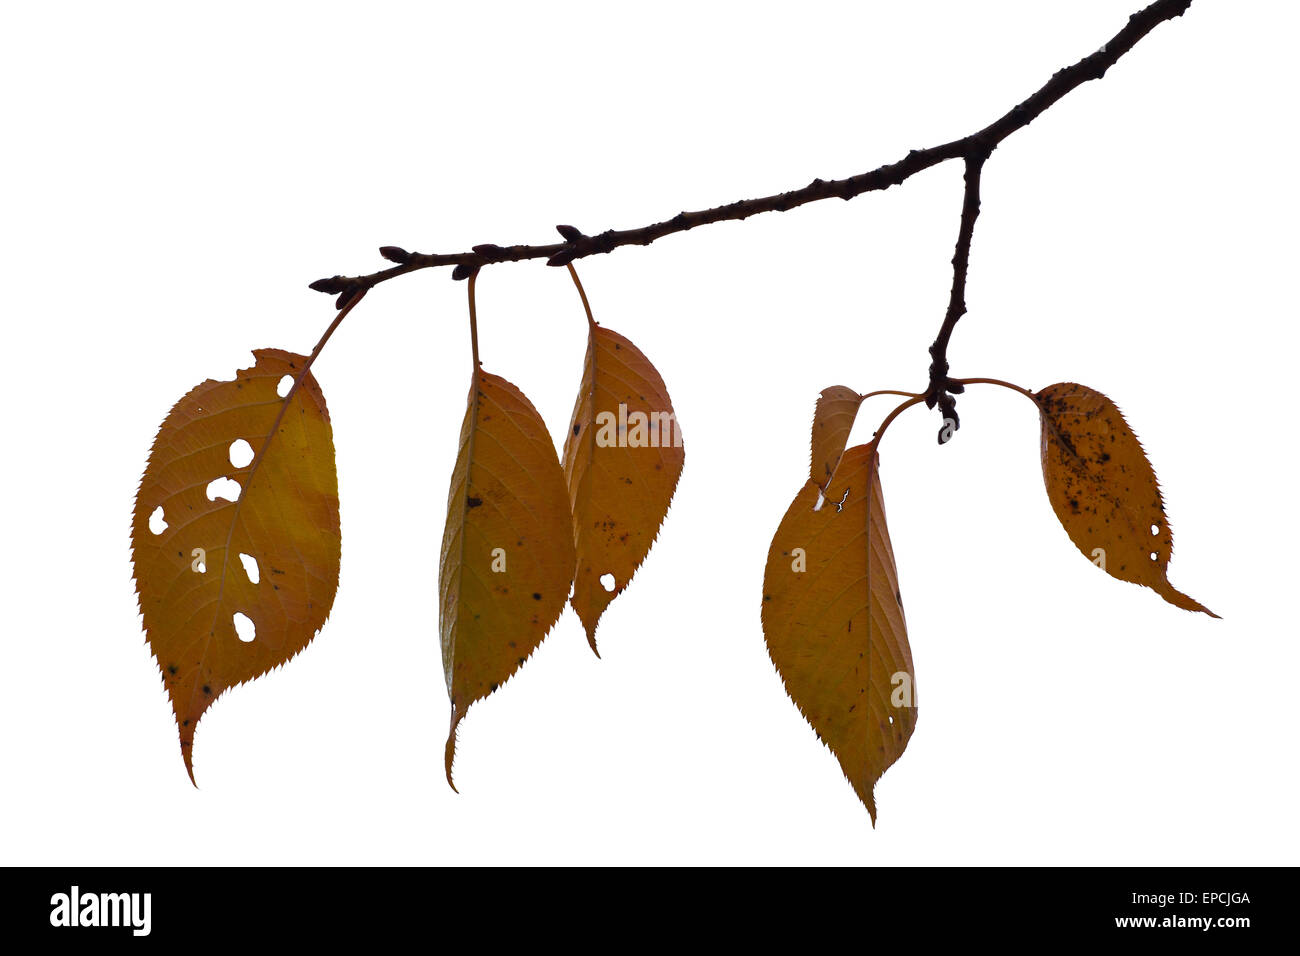 Autumn Leaves Isolated on White as Design Element Stock Photo